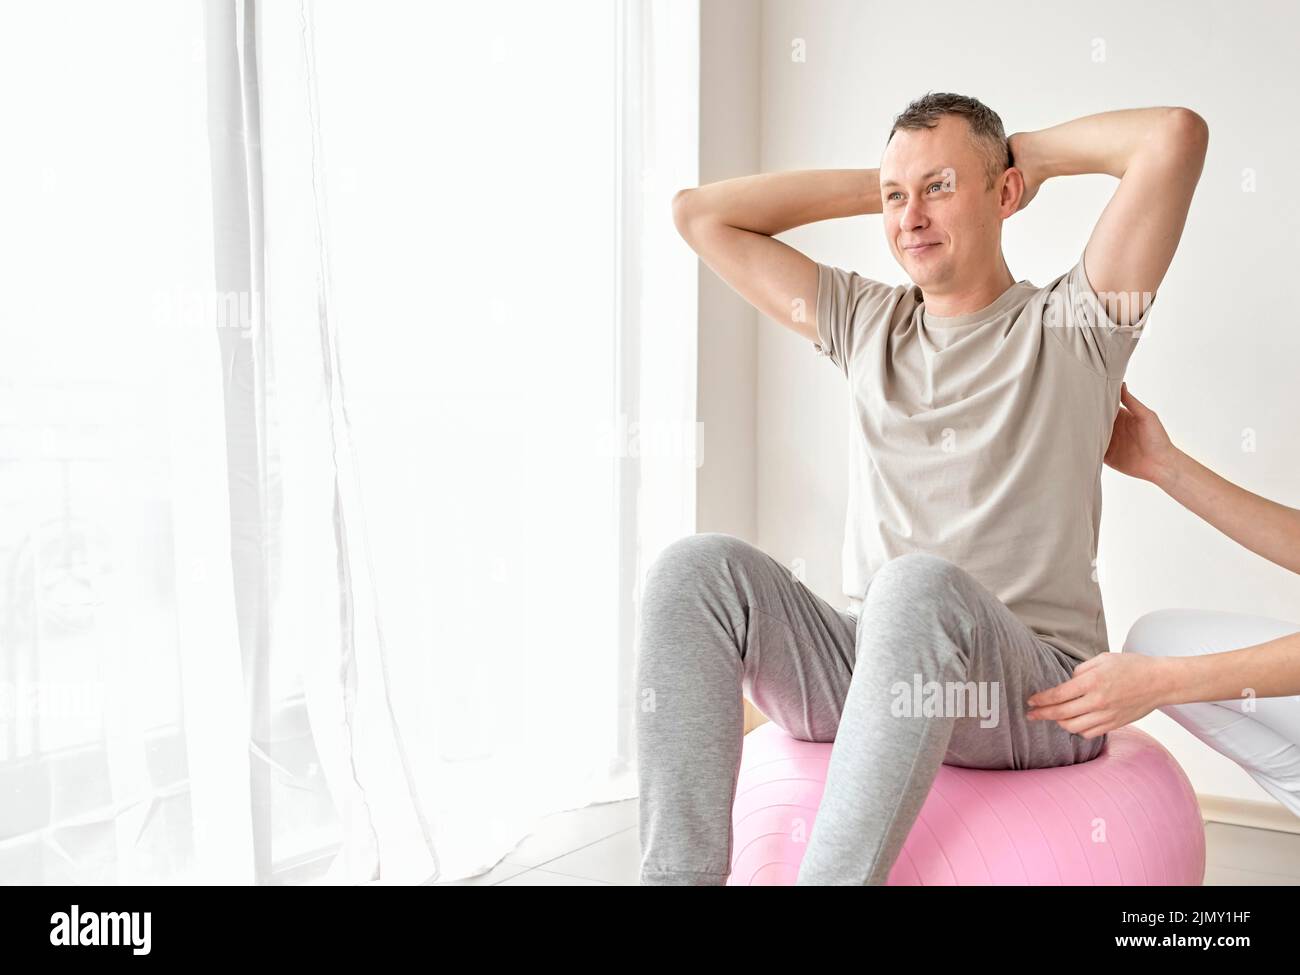 Therapist undergoing physical therapy with male patient Stock Photo